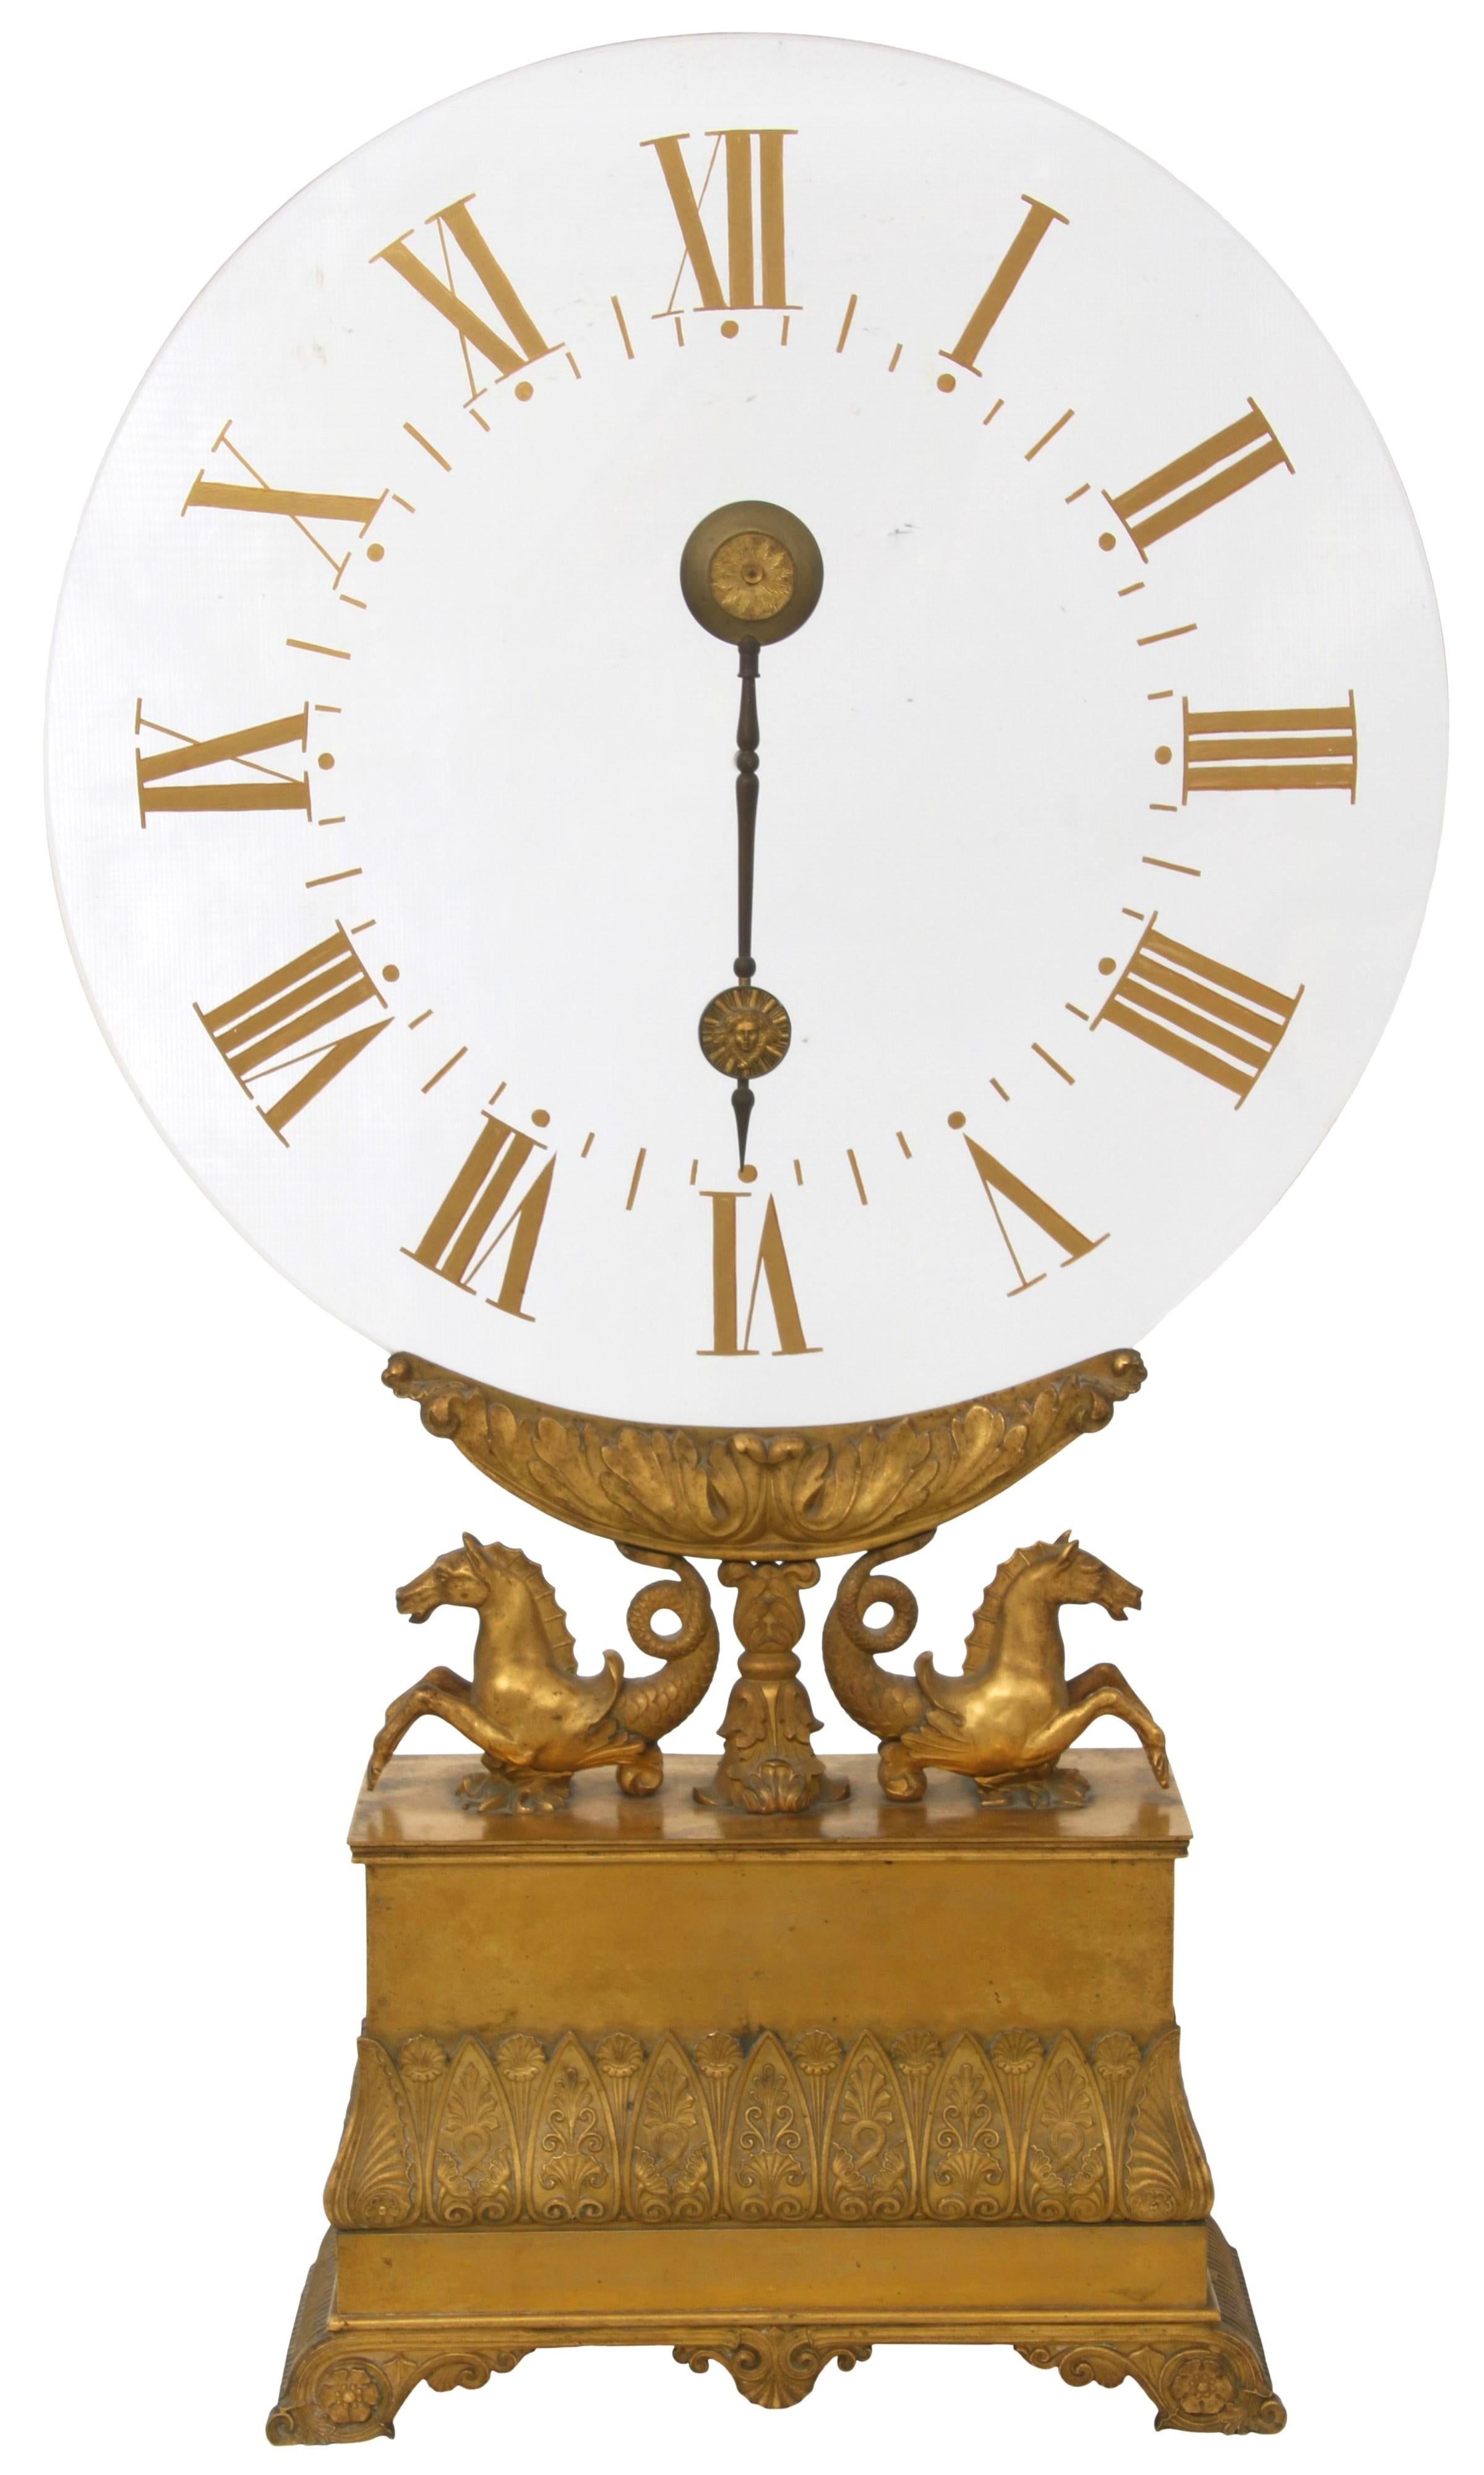 Very fine quality and large Early 19 century French gilt bronze mystery clock retailed by M.I. Tobias c.1820s.